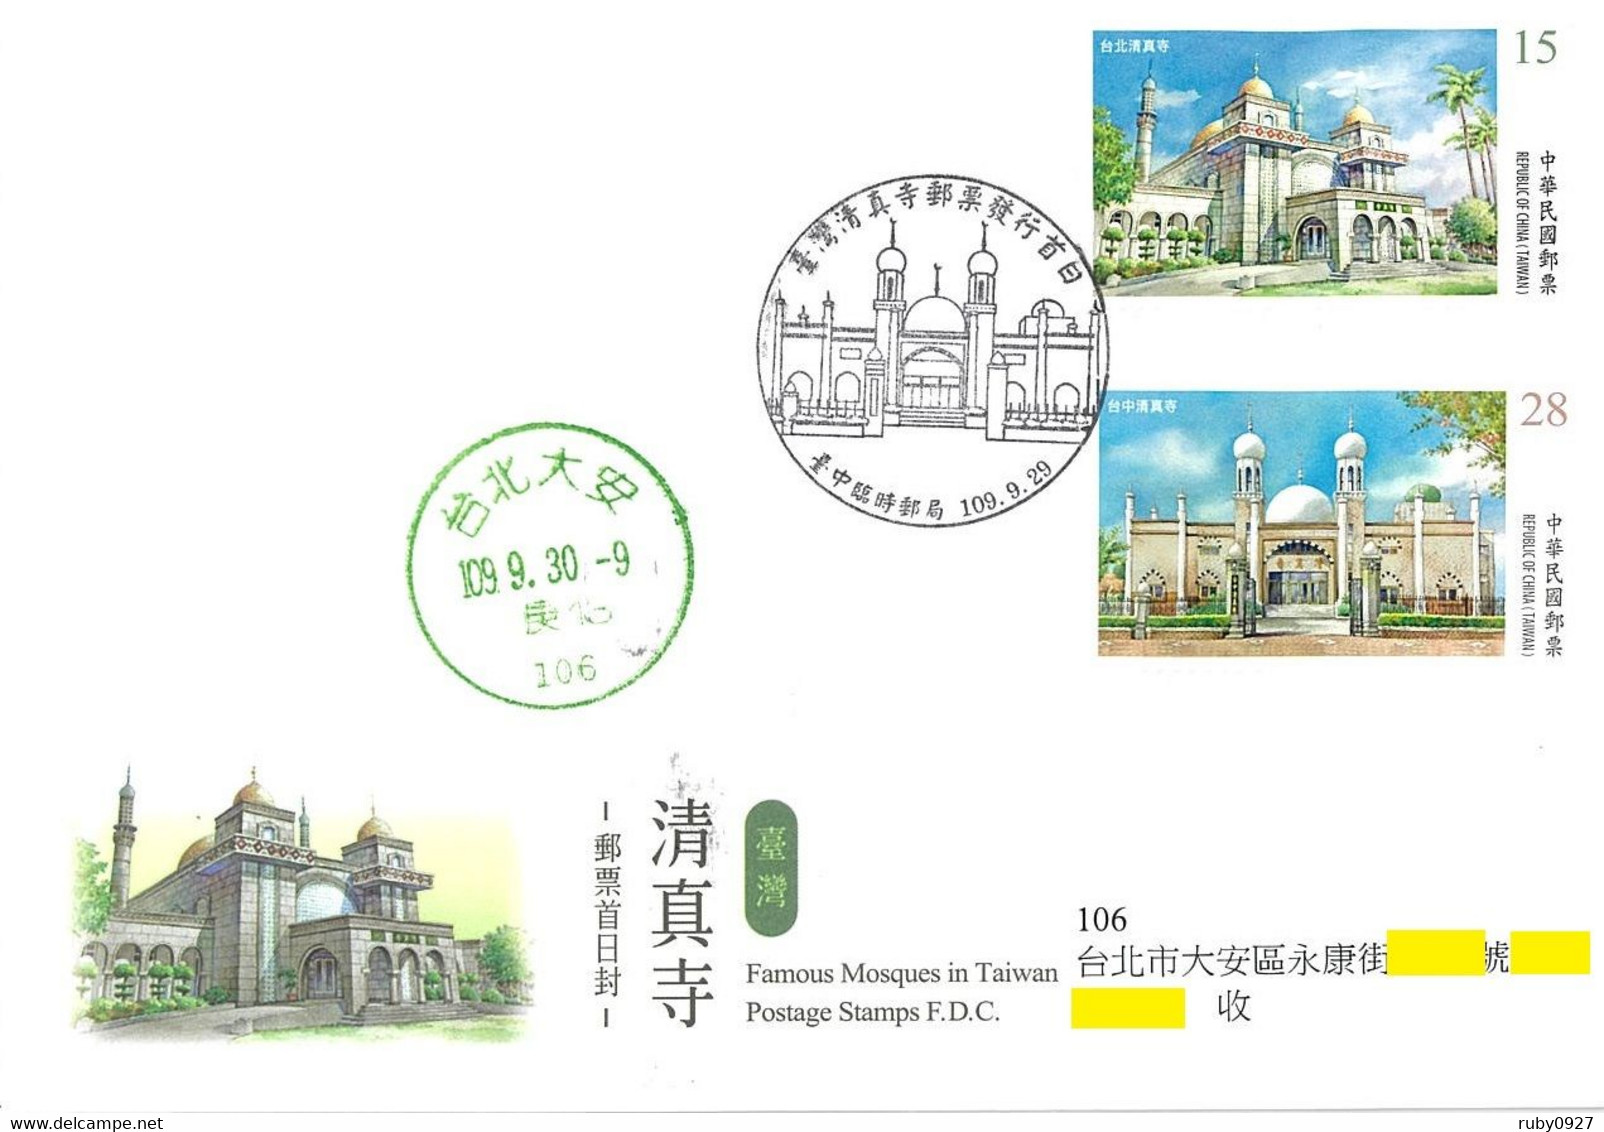 TAIWAN 2020 FAMOUS MOSQUES STAMPS FIRST DAY COVER, TAIPEI MOSQUE, TAICHUNG MOSQUE - Briefe U. Dokumente